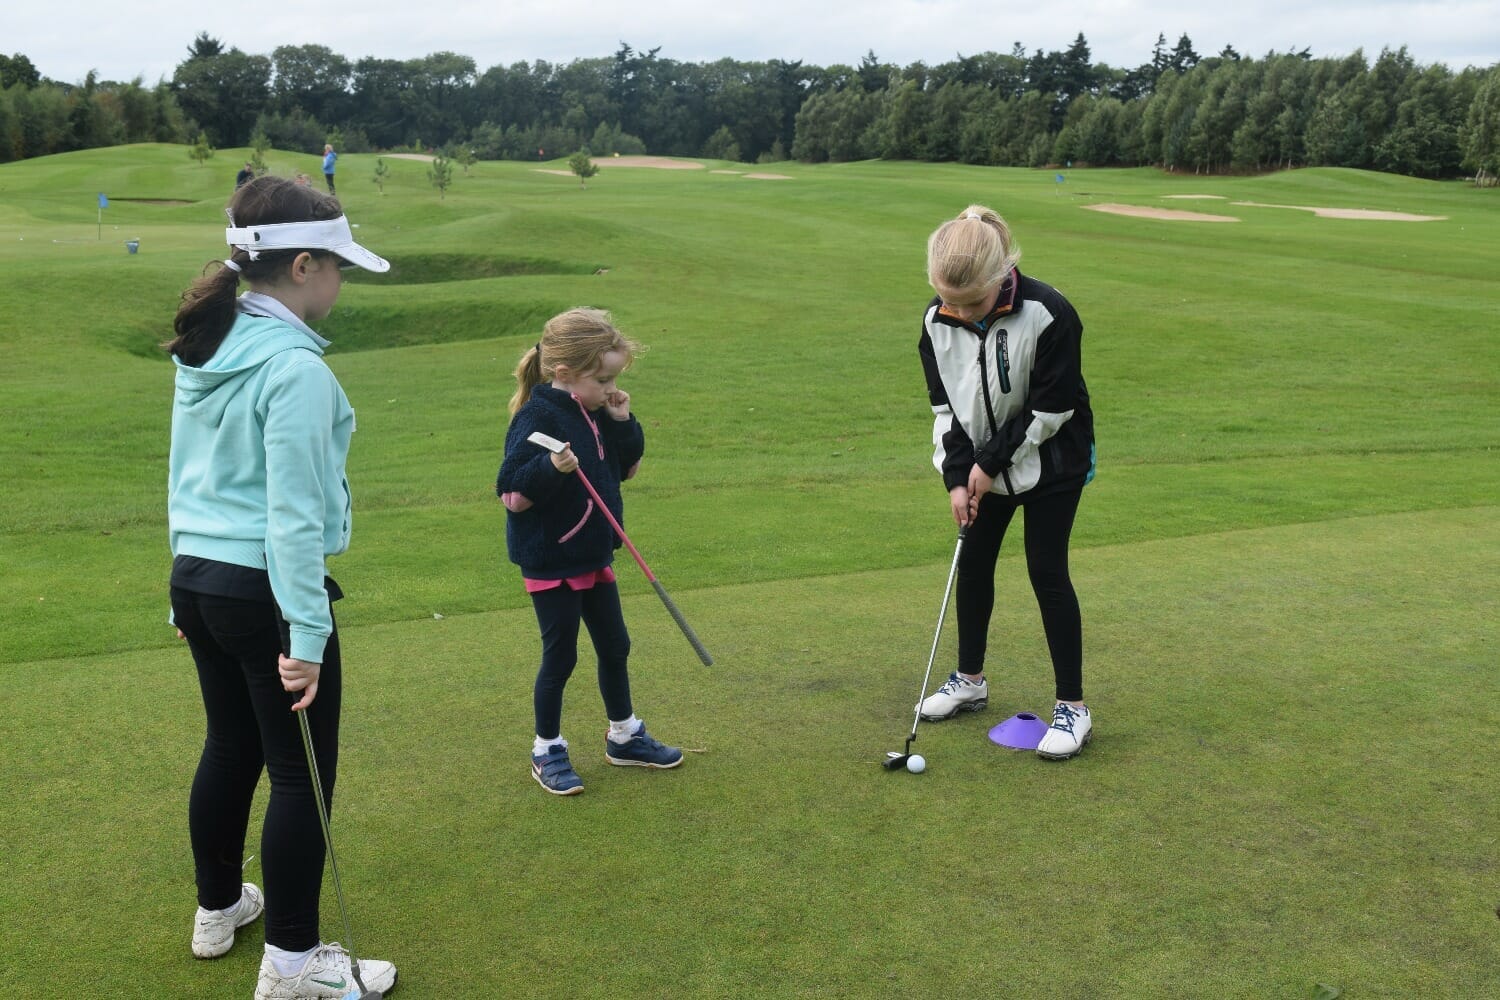 Golf4Girls4Life continues to flourish into 2018